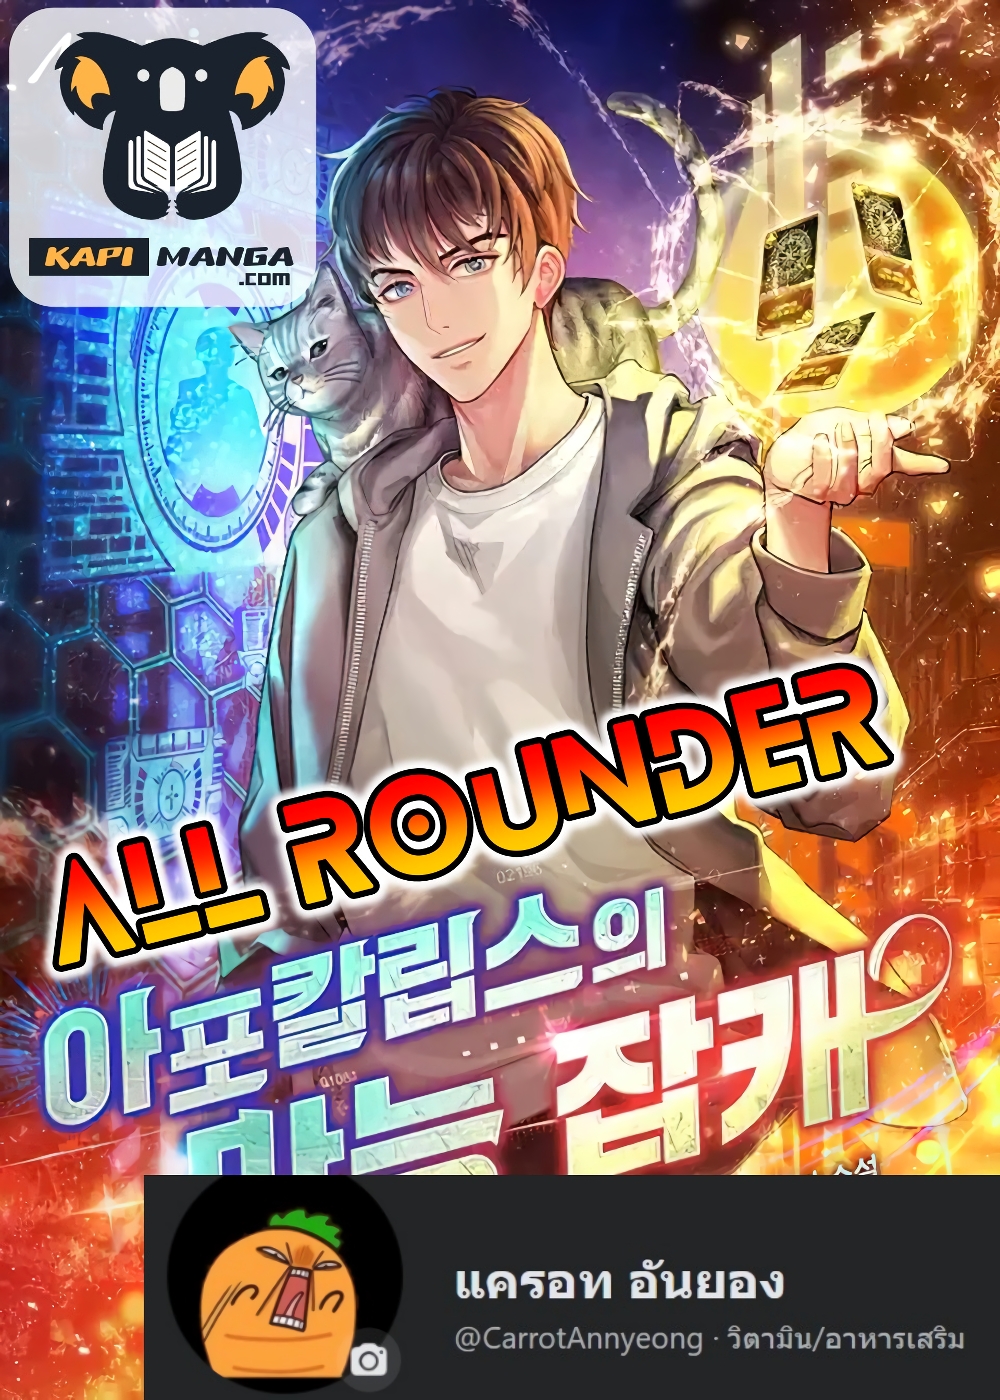 All Rounder3 (1)